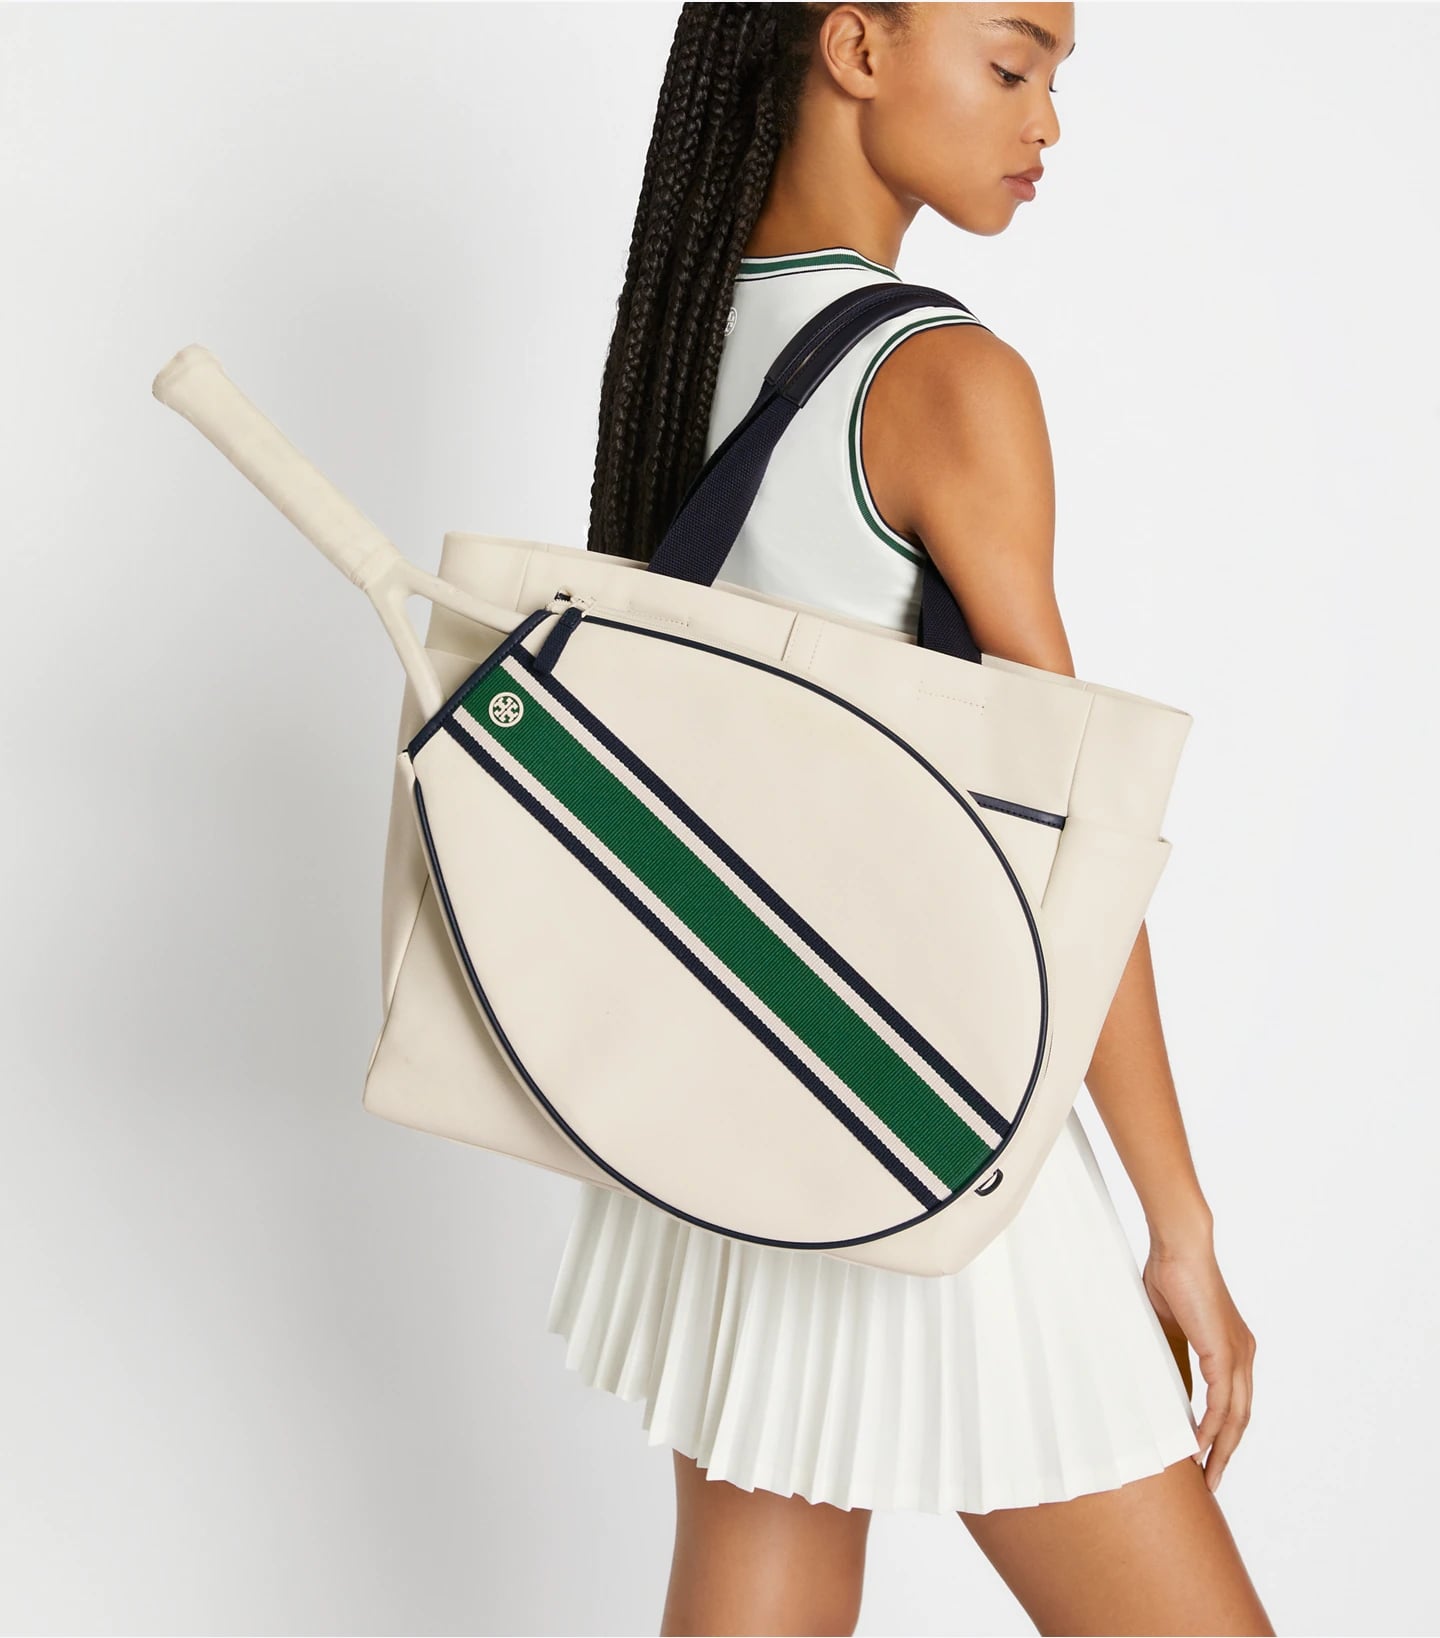 A Tennis Bag: Tory Sport Convertible Stripe Tennis Tote | 11 Gym Bags That  Can Store All Your Workout Essentials | POPSUGAR Fitness Photo 7